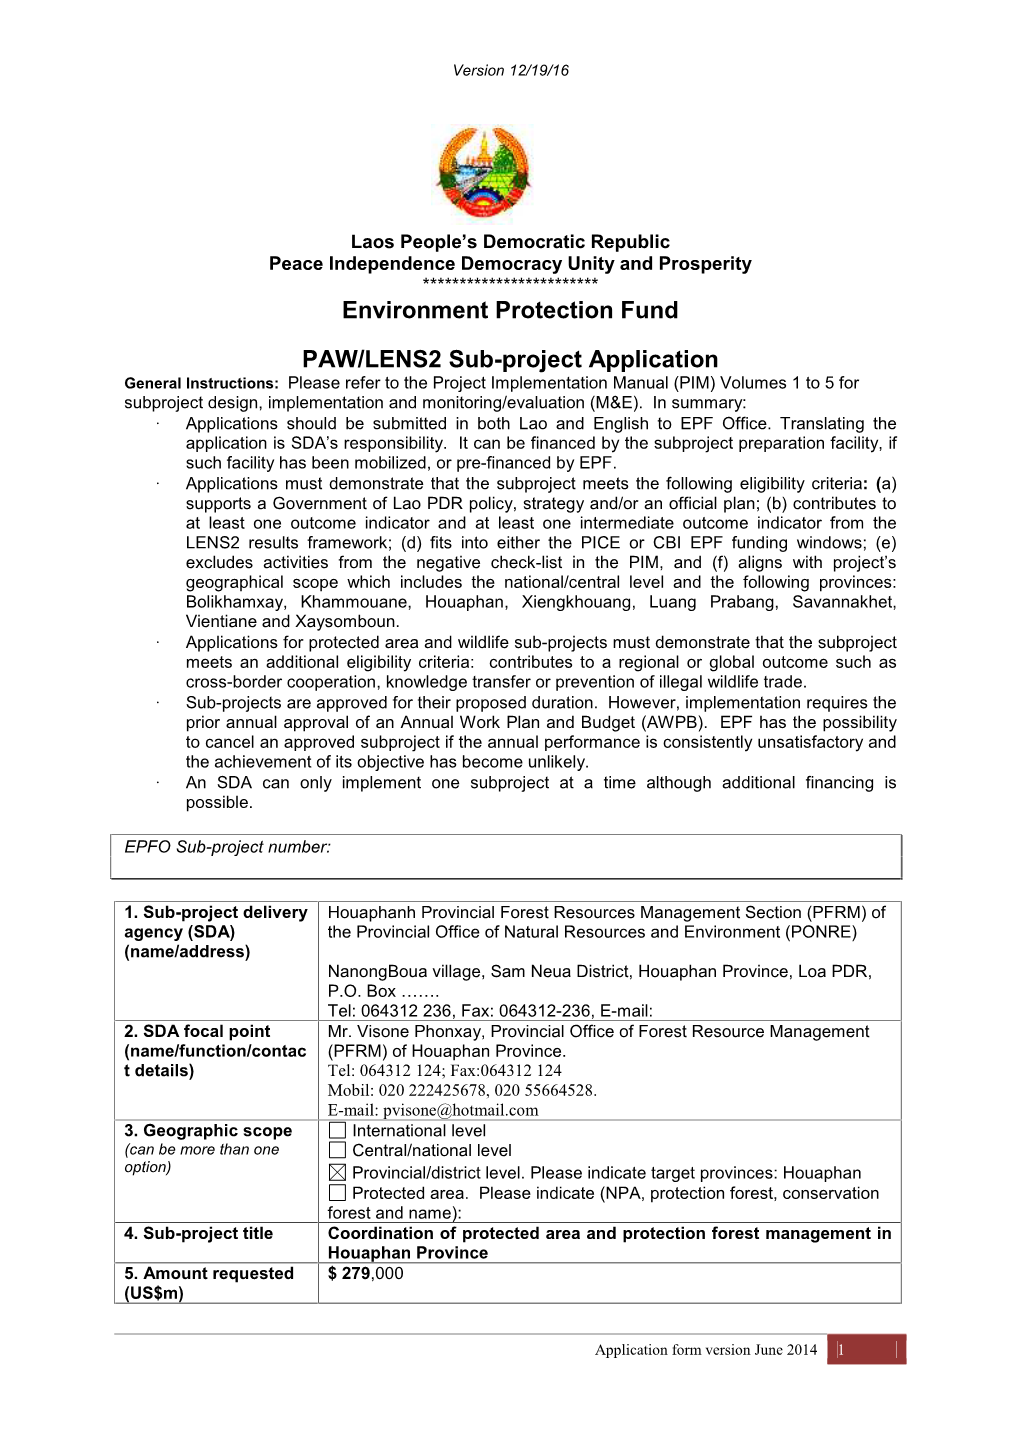 Environment Protection Fund PAW/LENS2 Sub-Project Application